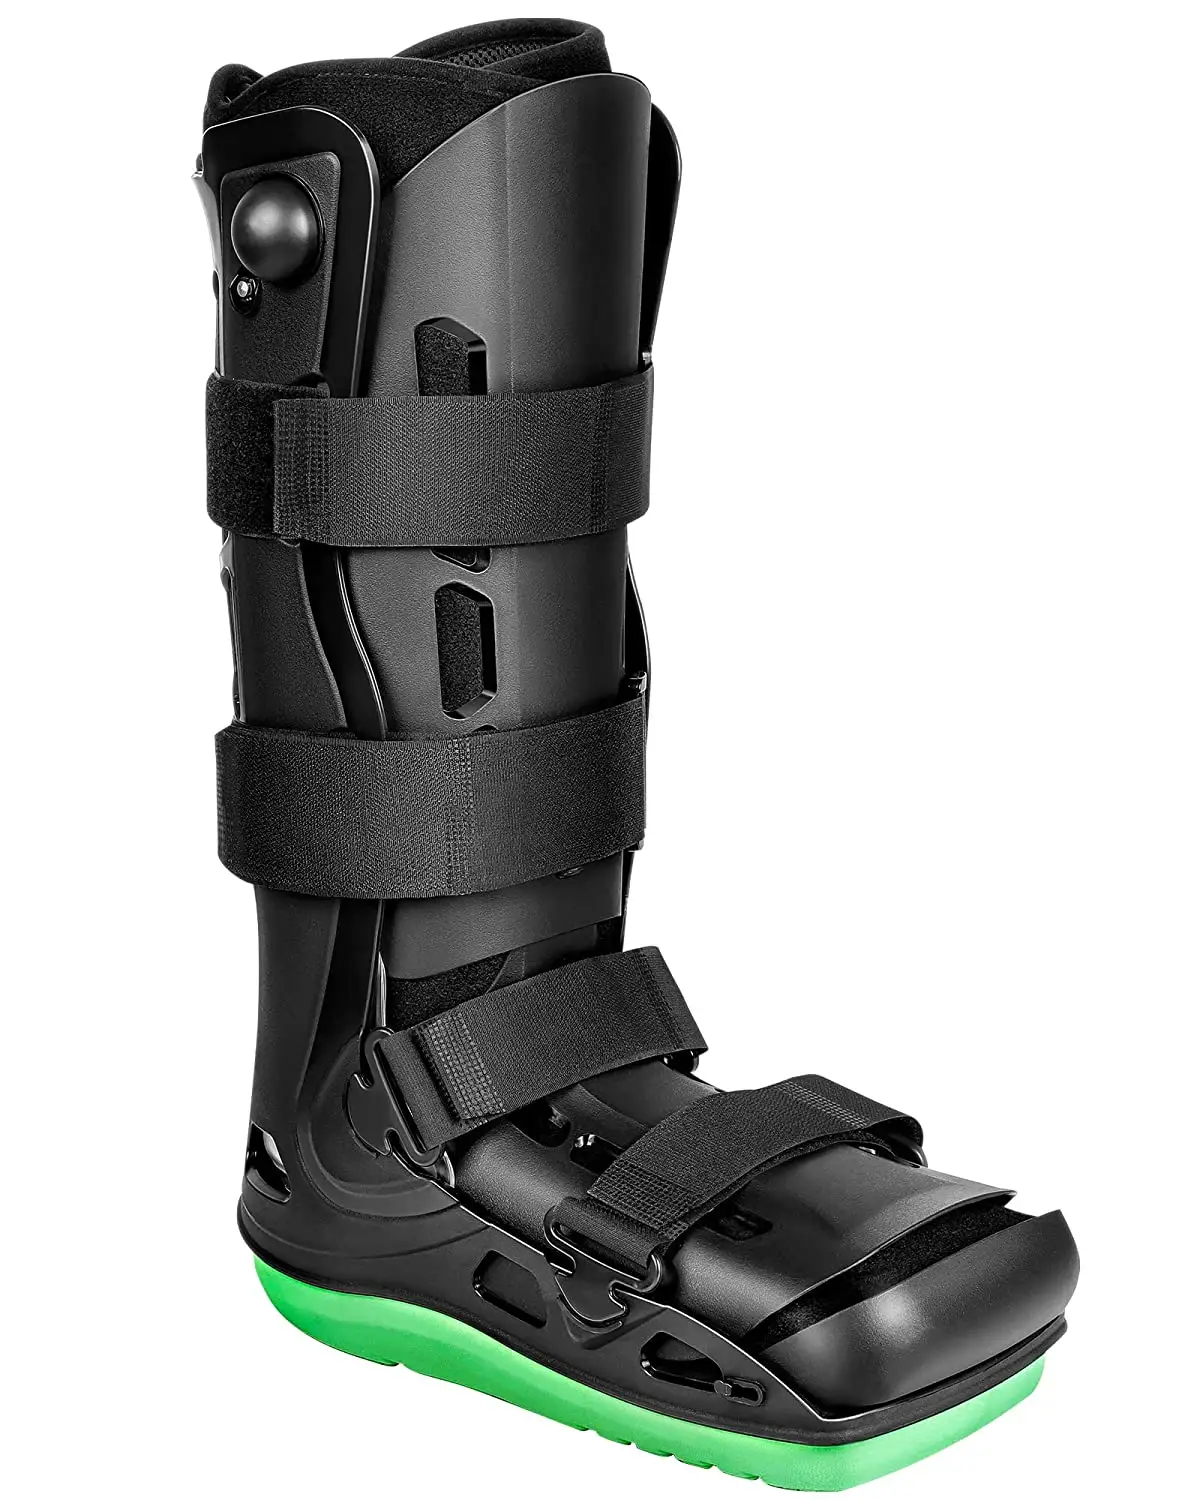 Tall Pneumatic Walking Boot Orthopedic CAM Air Walker & Inflatable Surgical Leg Cast for Broken Foot, Sprained Ankle